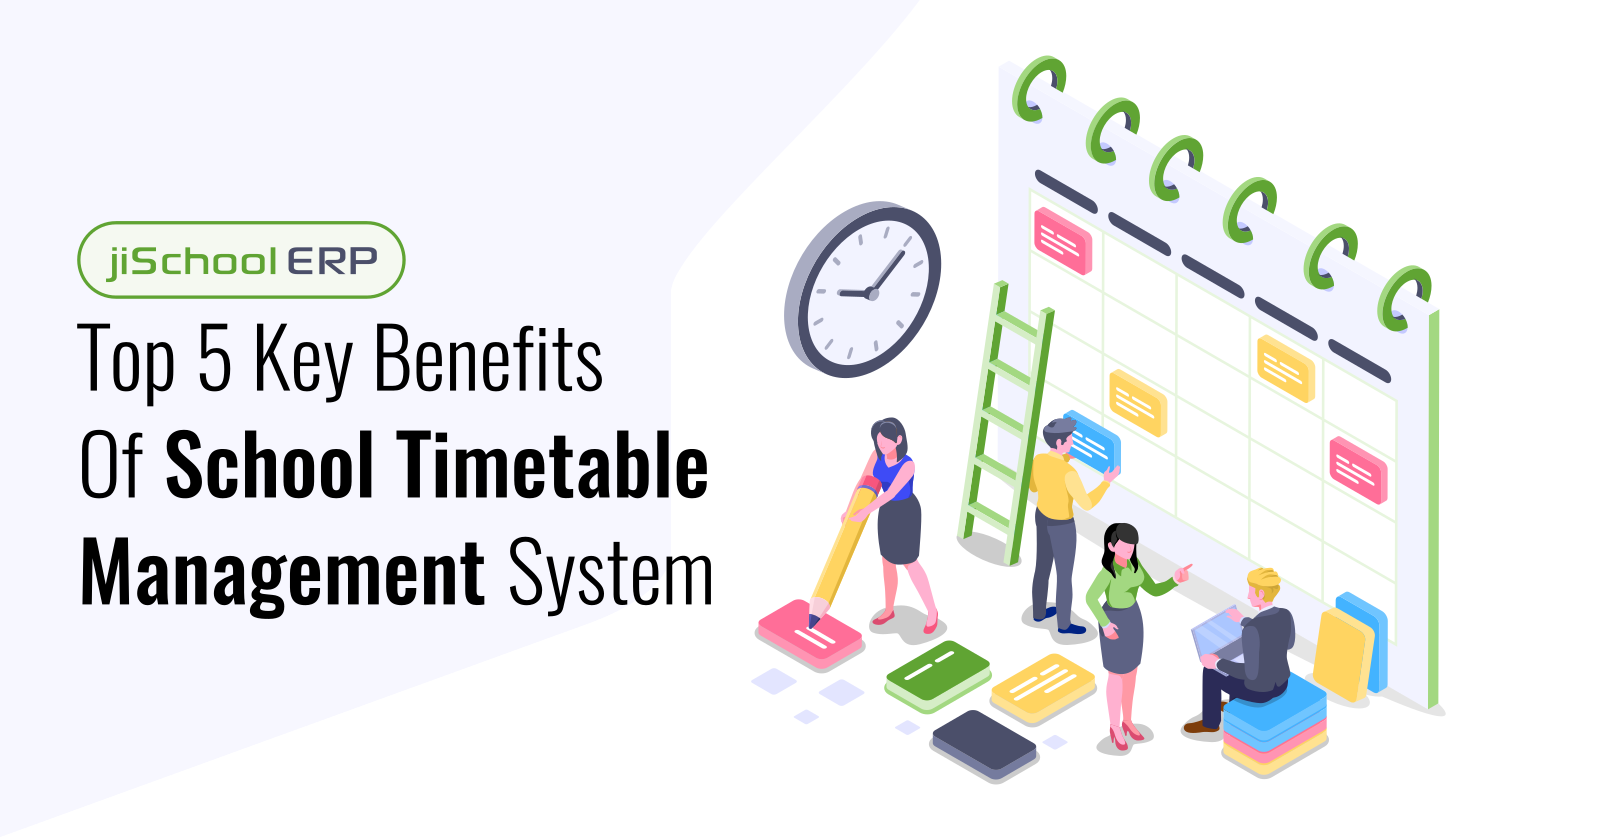 Top 5 Key Benefits Of School Timetable Management System